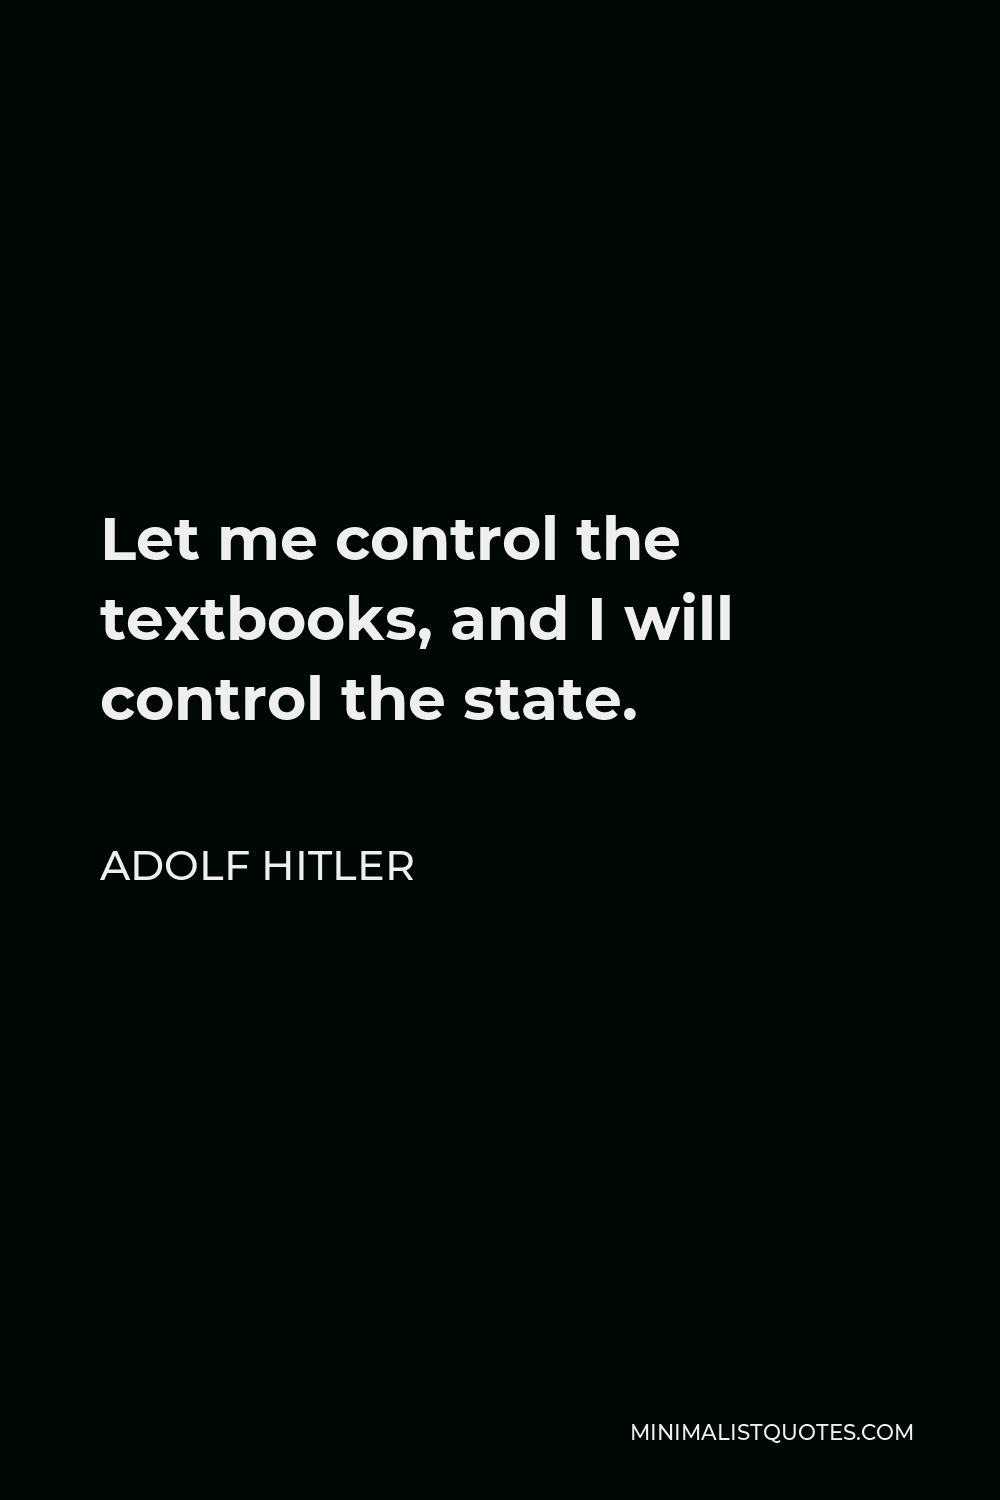 Adolf Hitler Quote - Let me control the textbooks, and I will control the state.